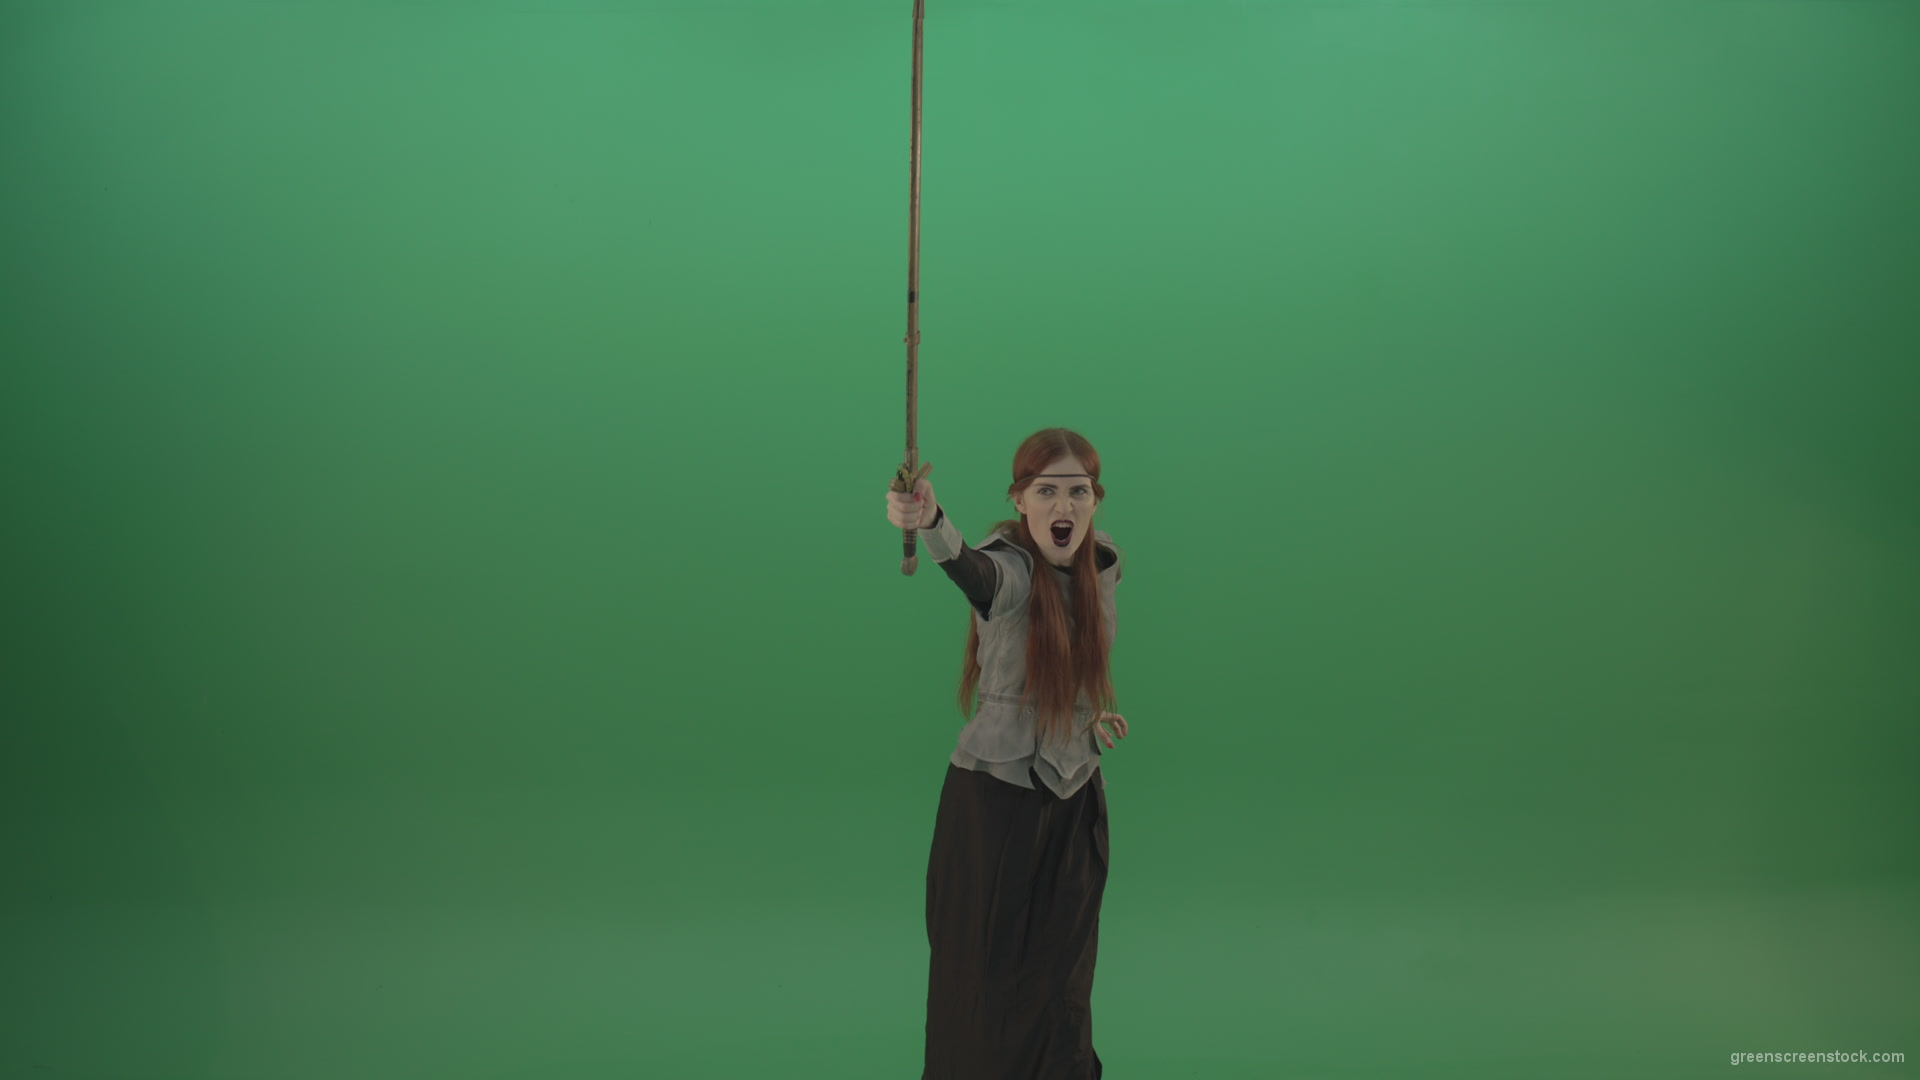 Girl-shouts-her-foes-on-an-offensive-raising-a-sword-up-on-a-green-background_007 Green Screen Stock